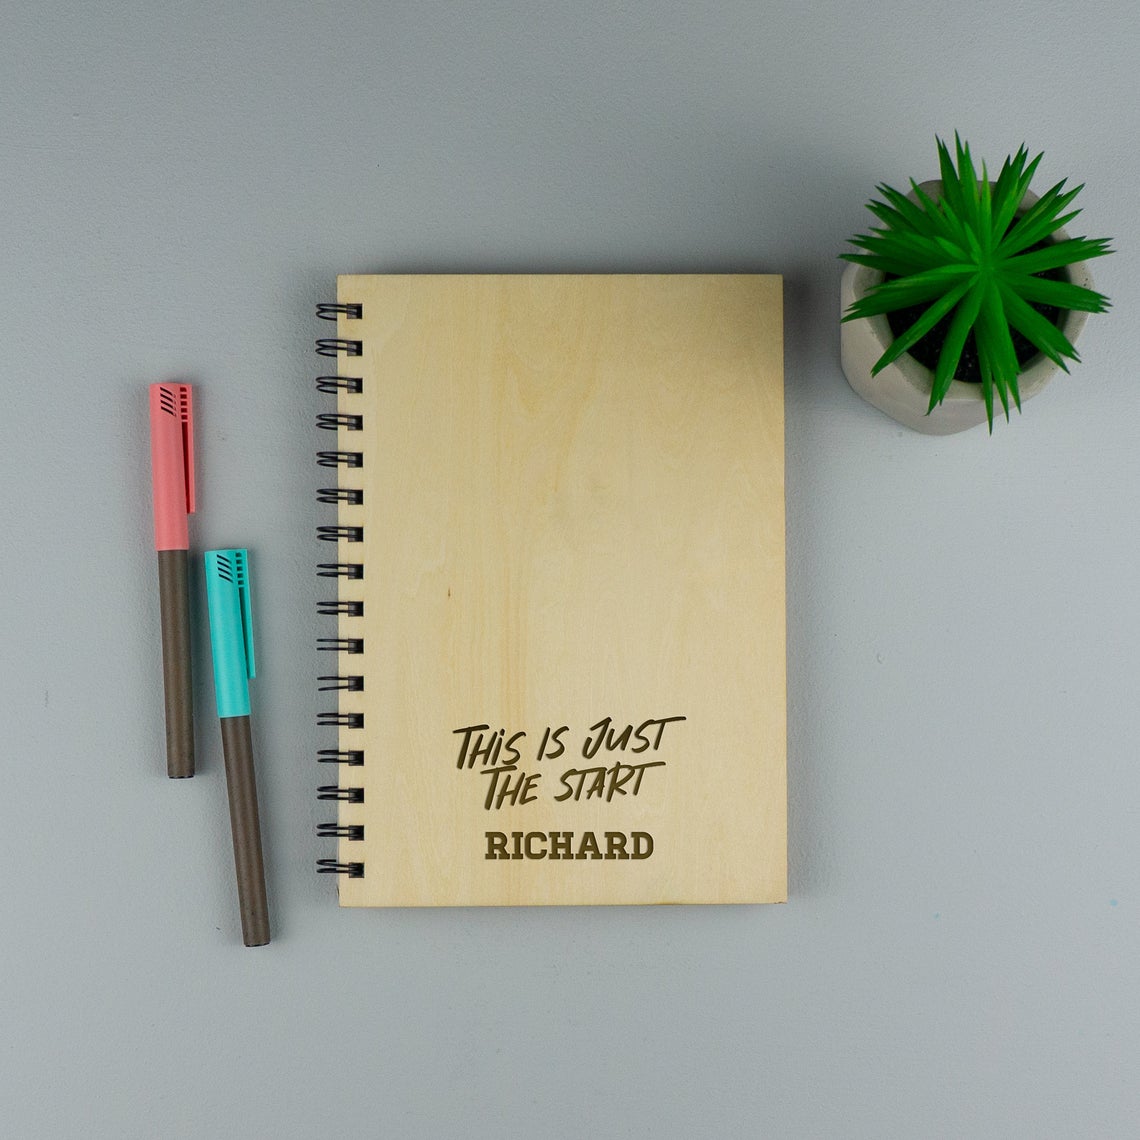 Motivational personalised note book